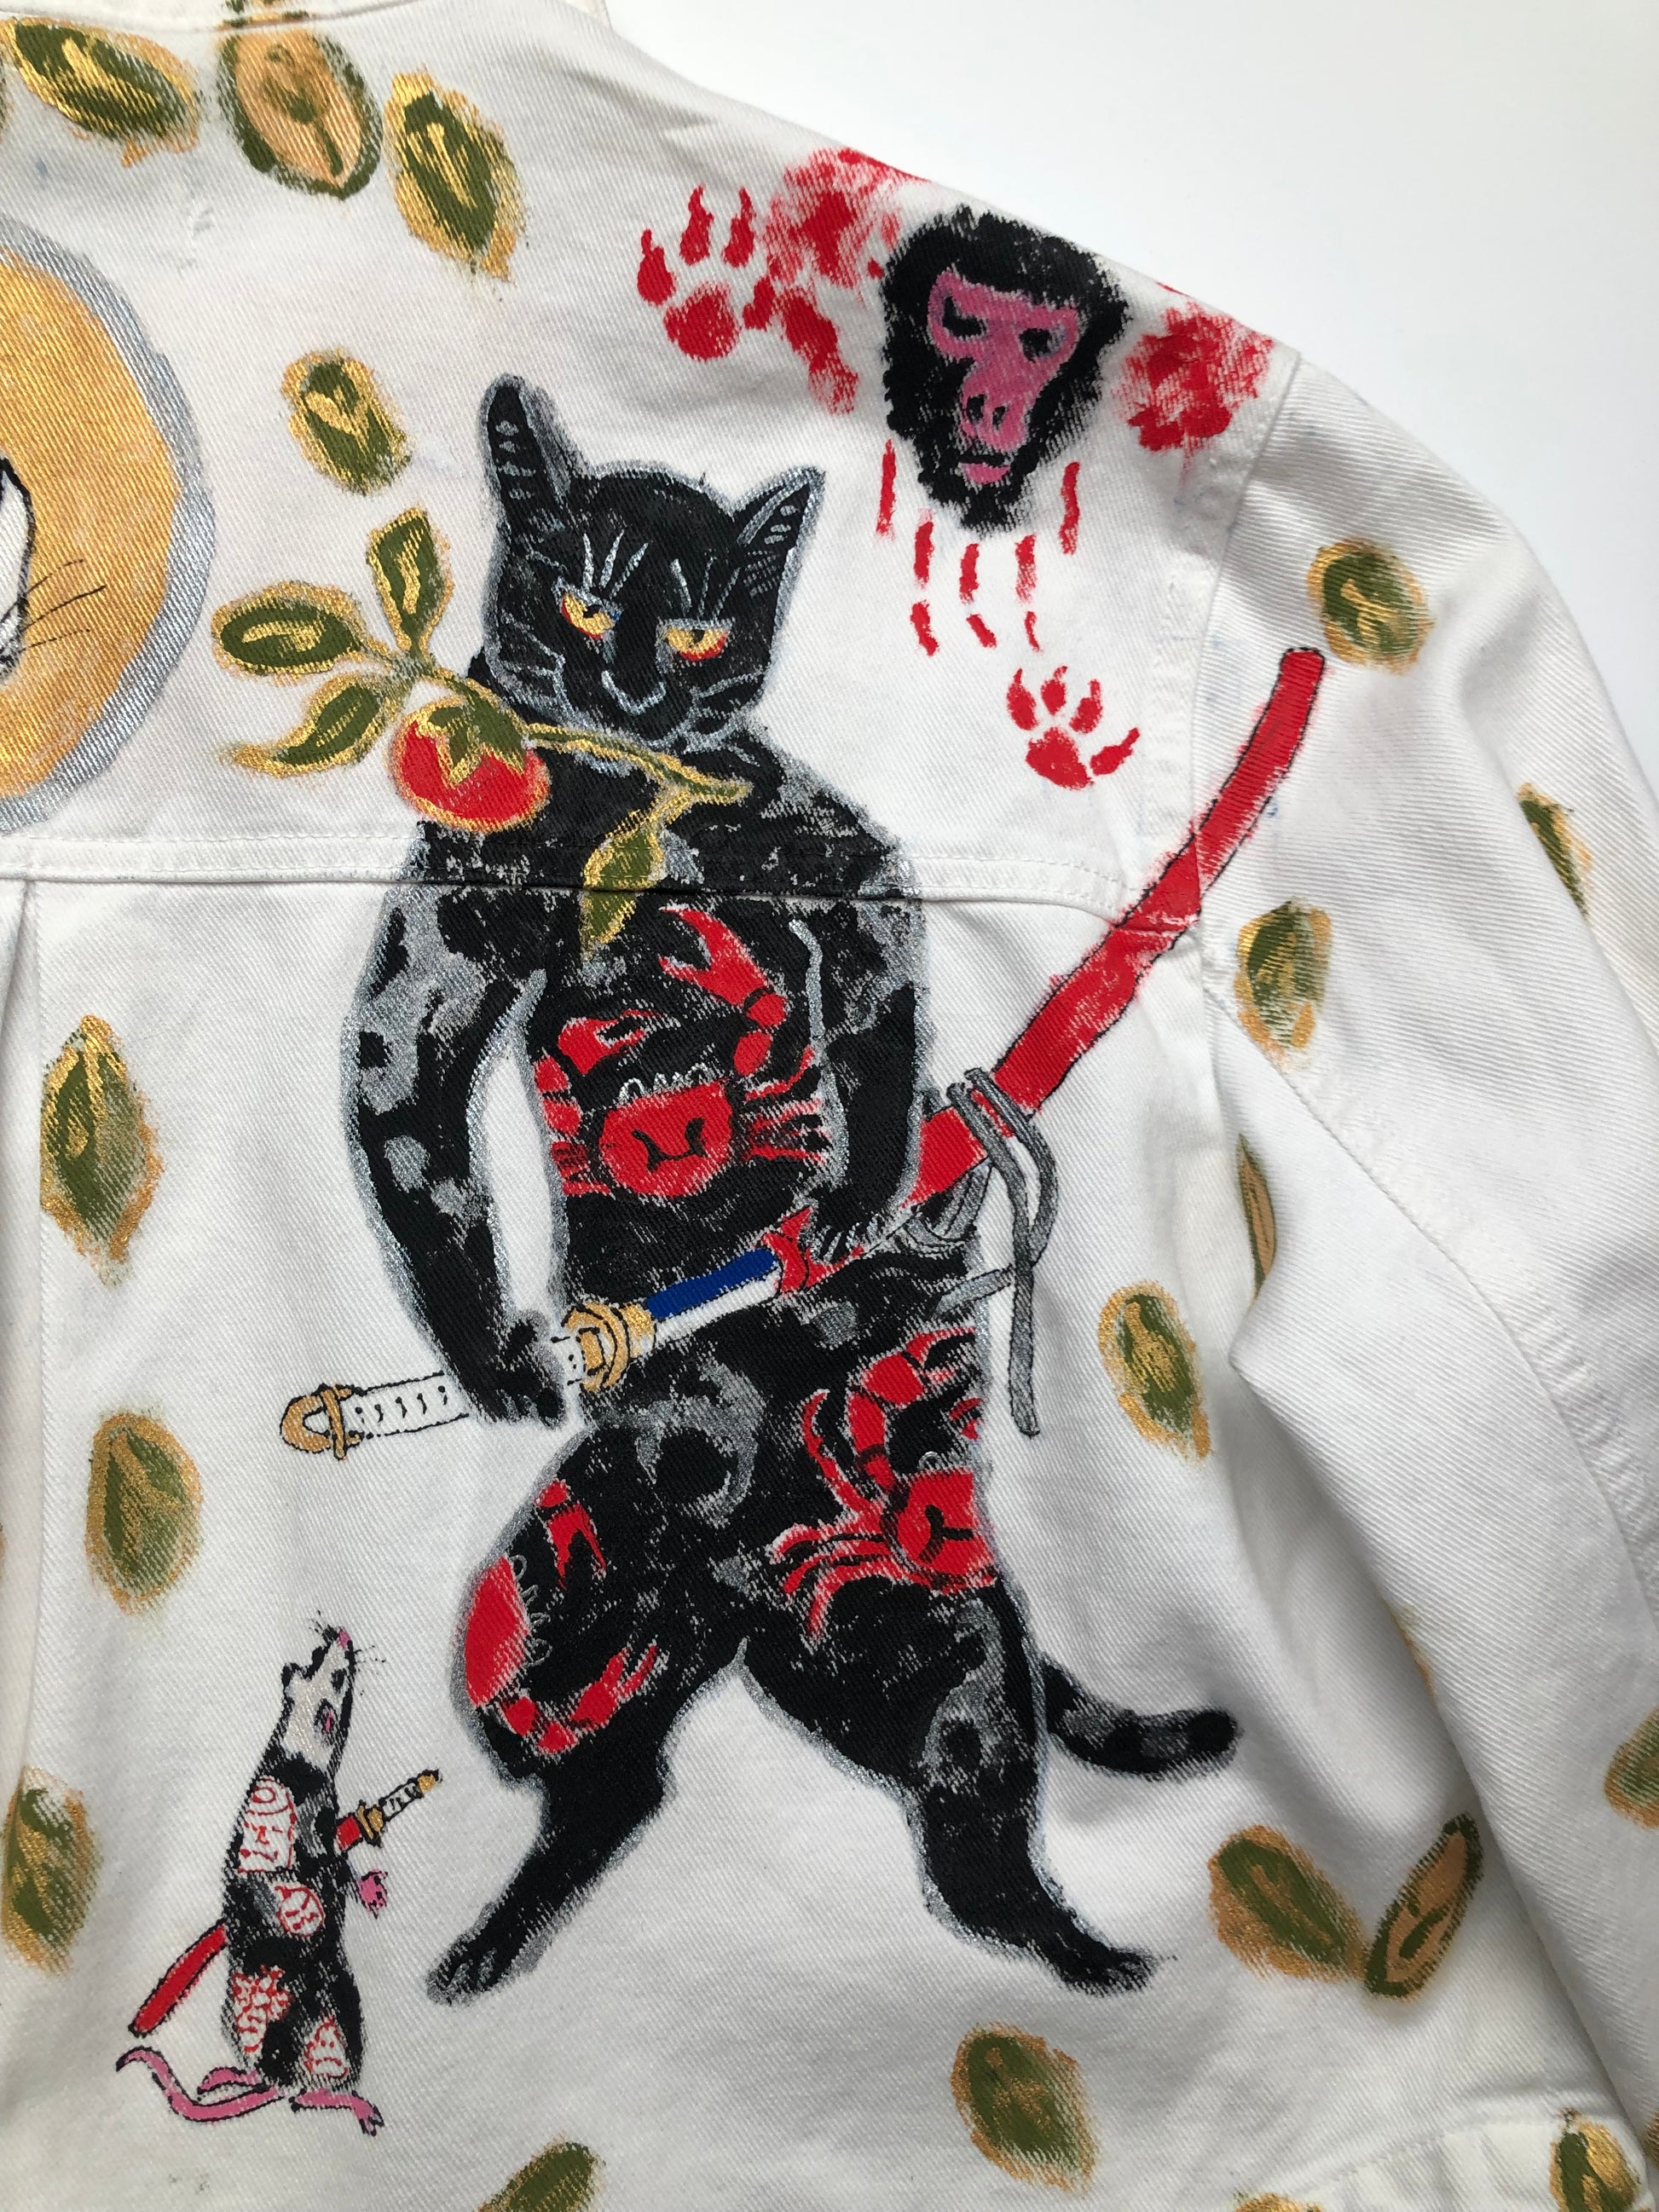 A cat that beheaded a monkey and a shocked mouse on a women's denim jacket